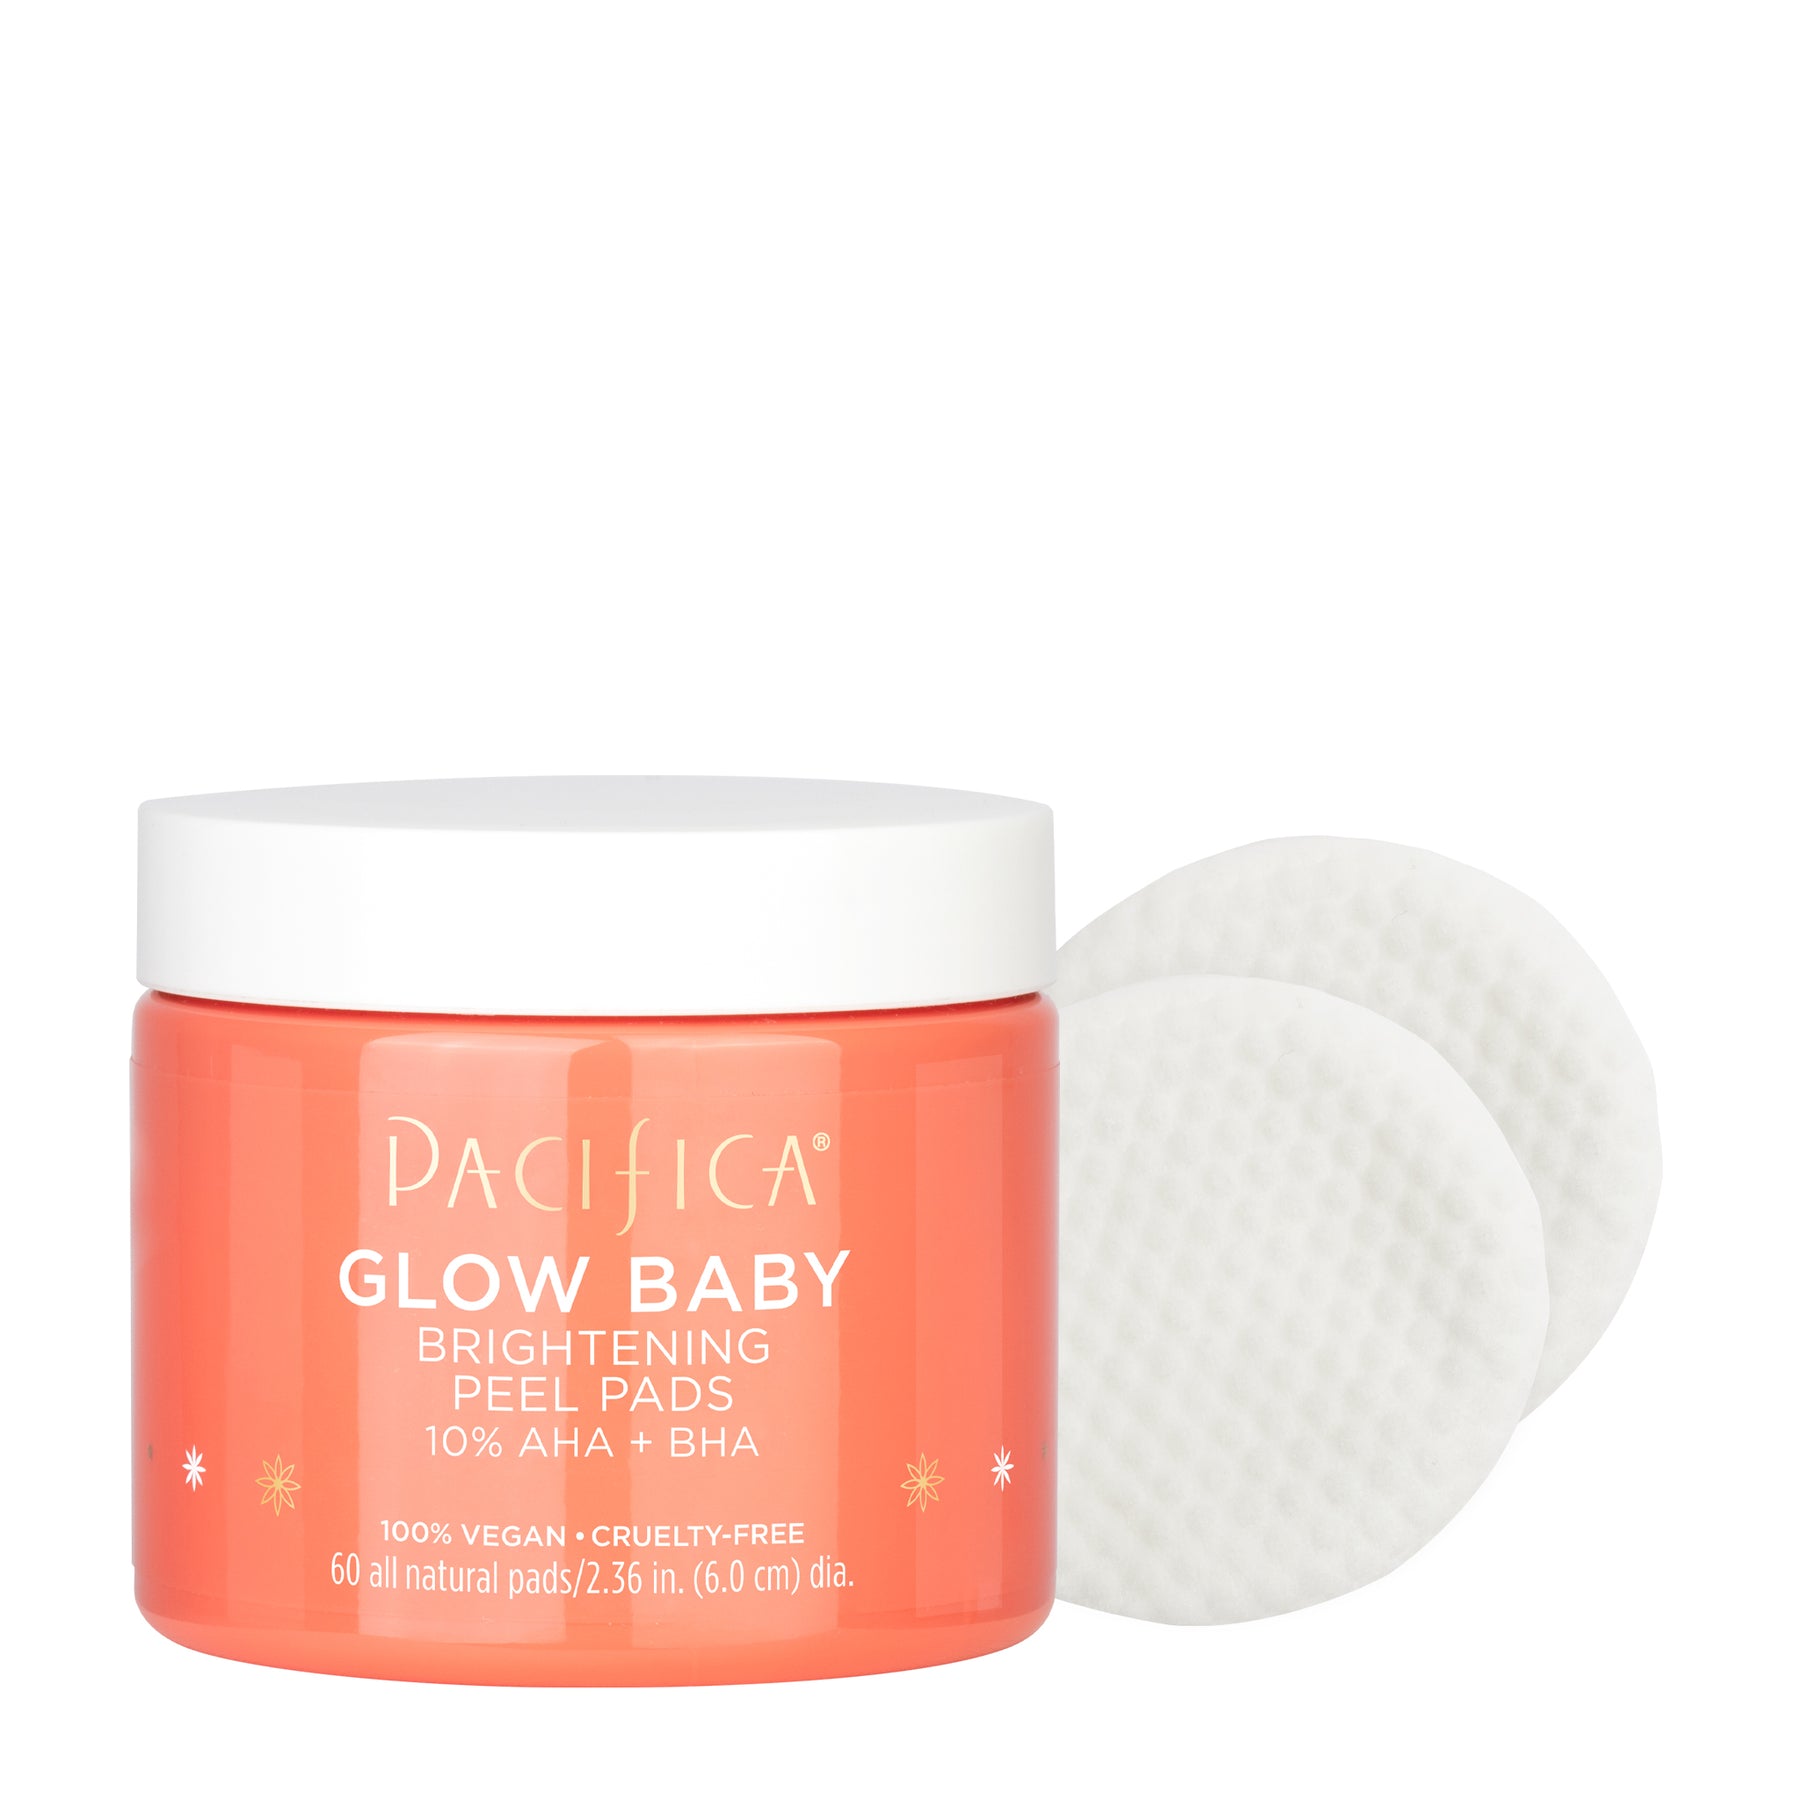 Glow Baby Brightening Peel Pads - Skin Care - Pacifica Beauty